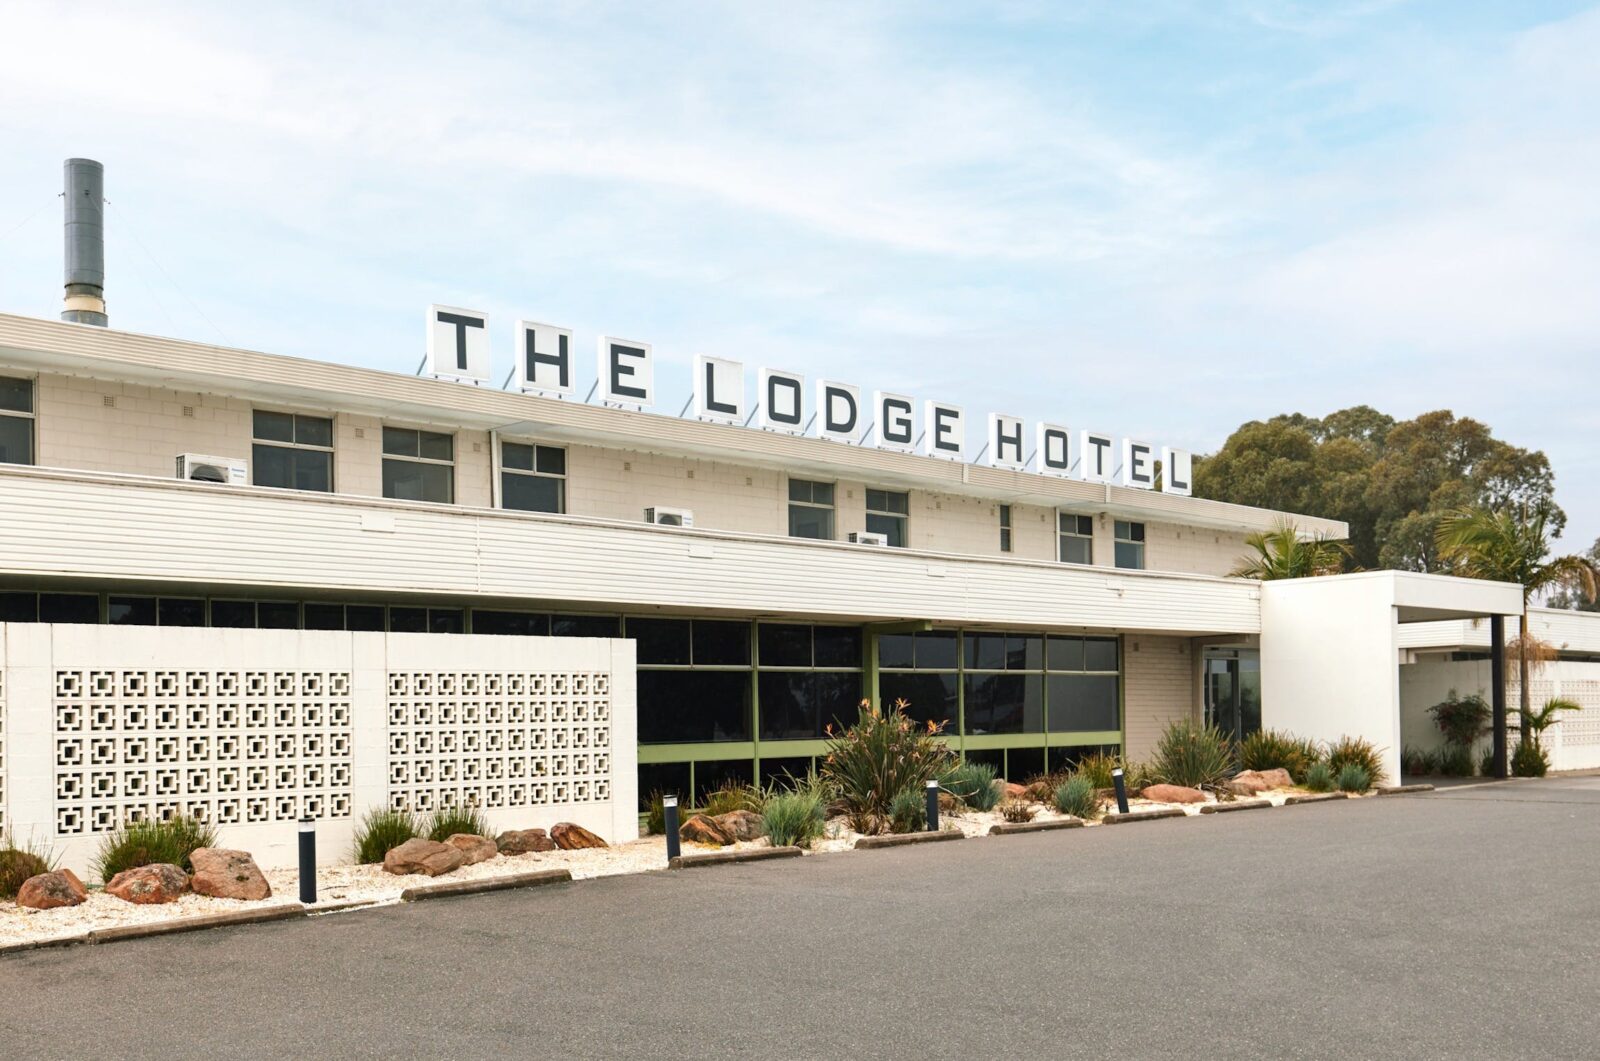 The Brahma Lodge Hotel - Front